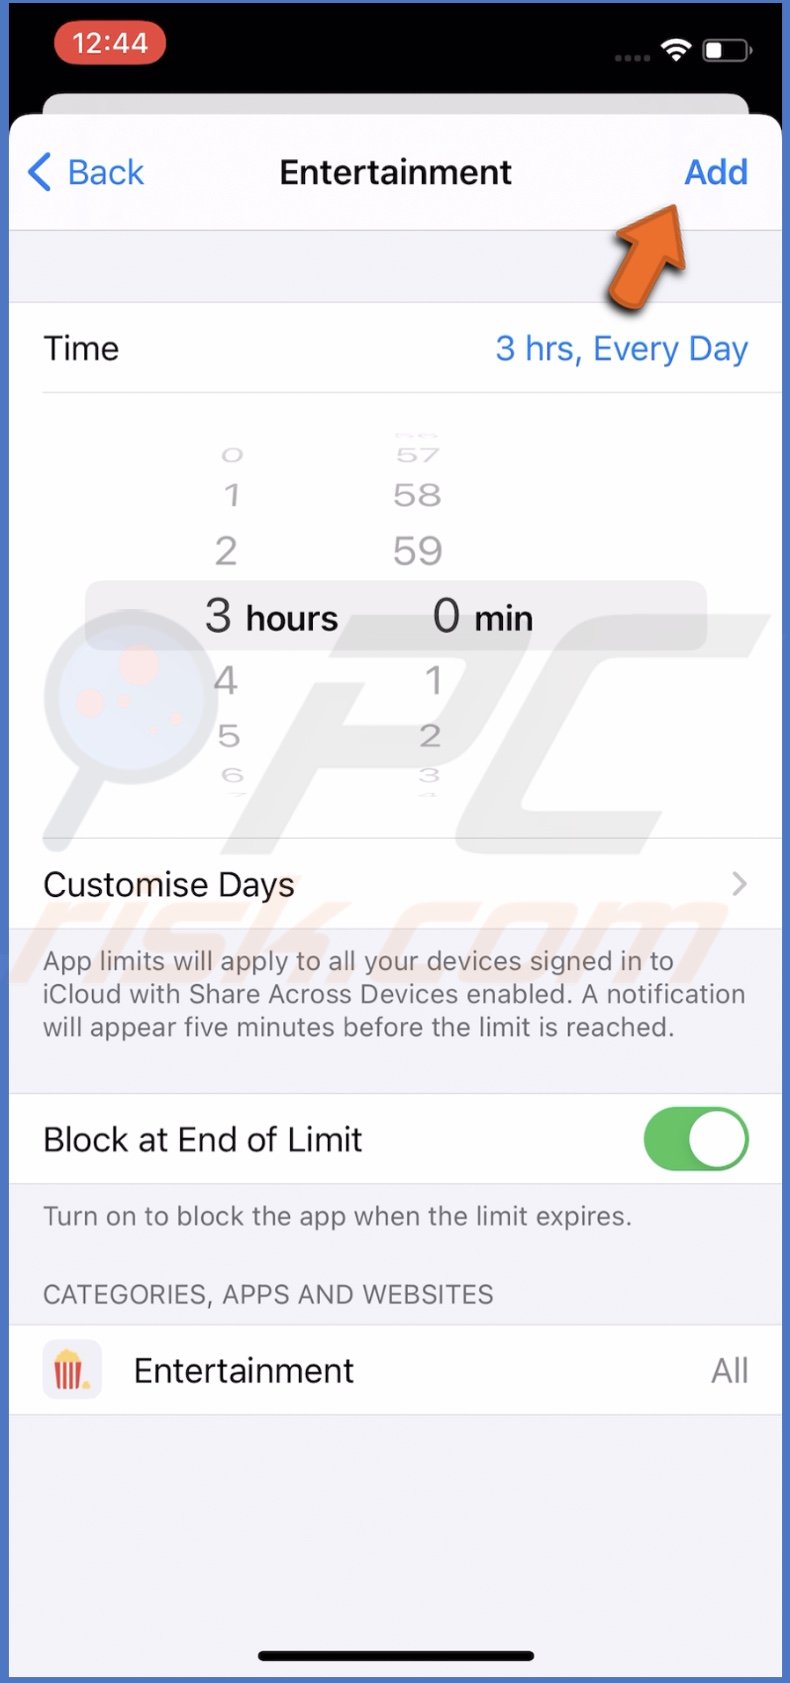 Add App Category limit duration